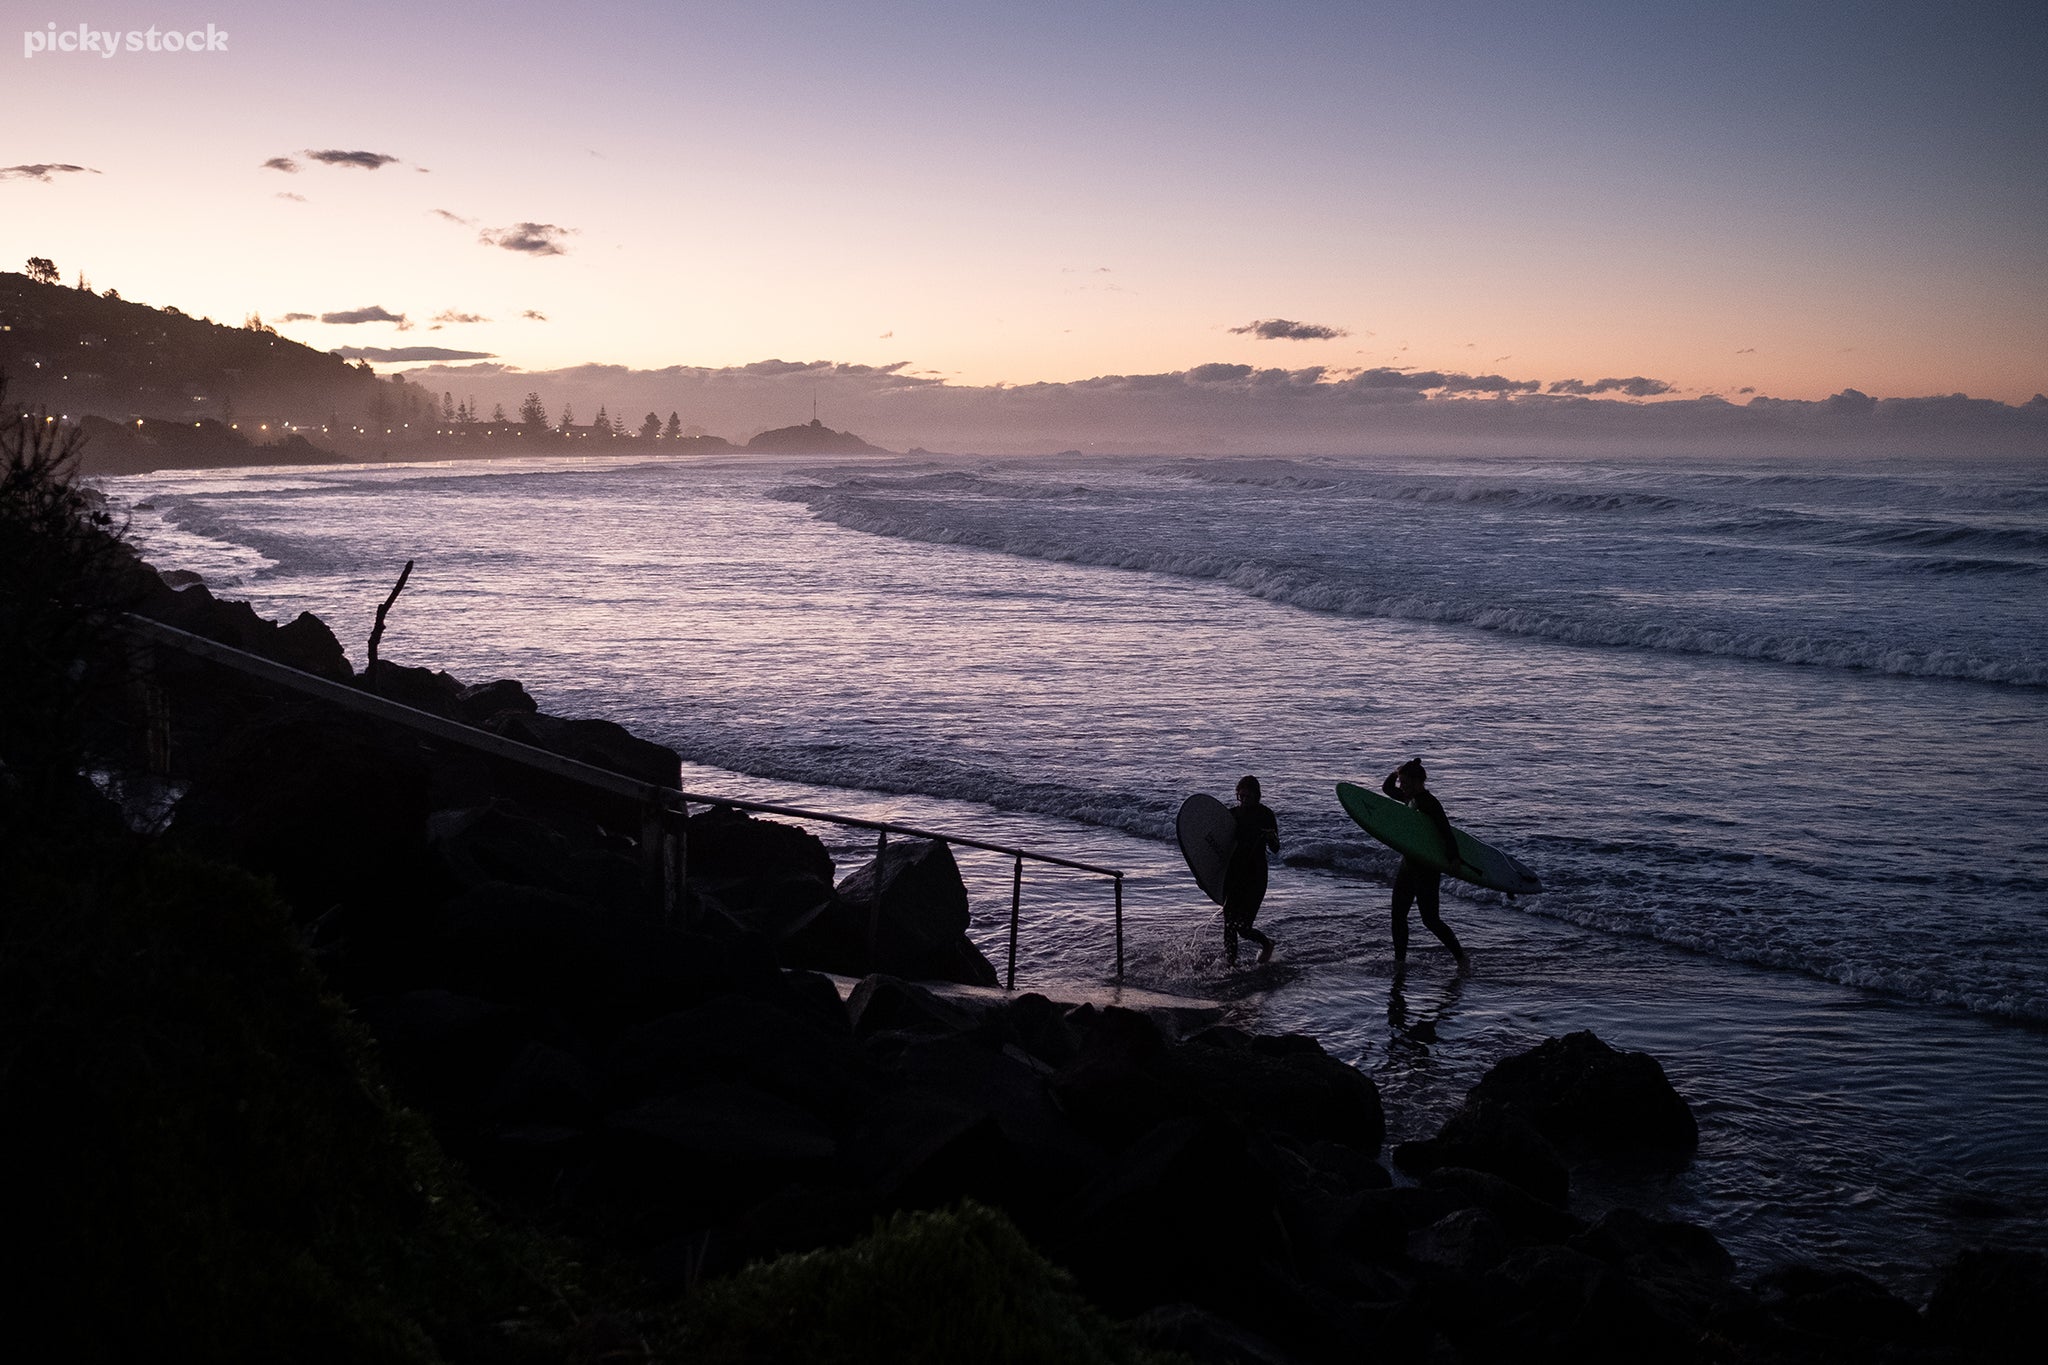 A landscape of two female surfers in black wetsuits leaving the water for a concrete ramp built int a rocky flood wall. The sun sets behind dense clouds while street light glow in the distance.